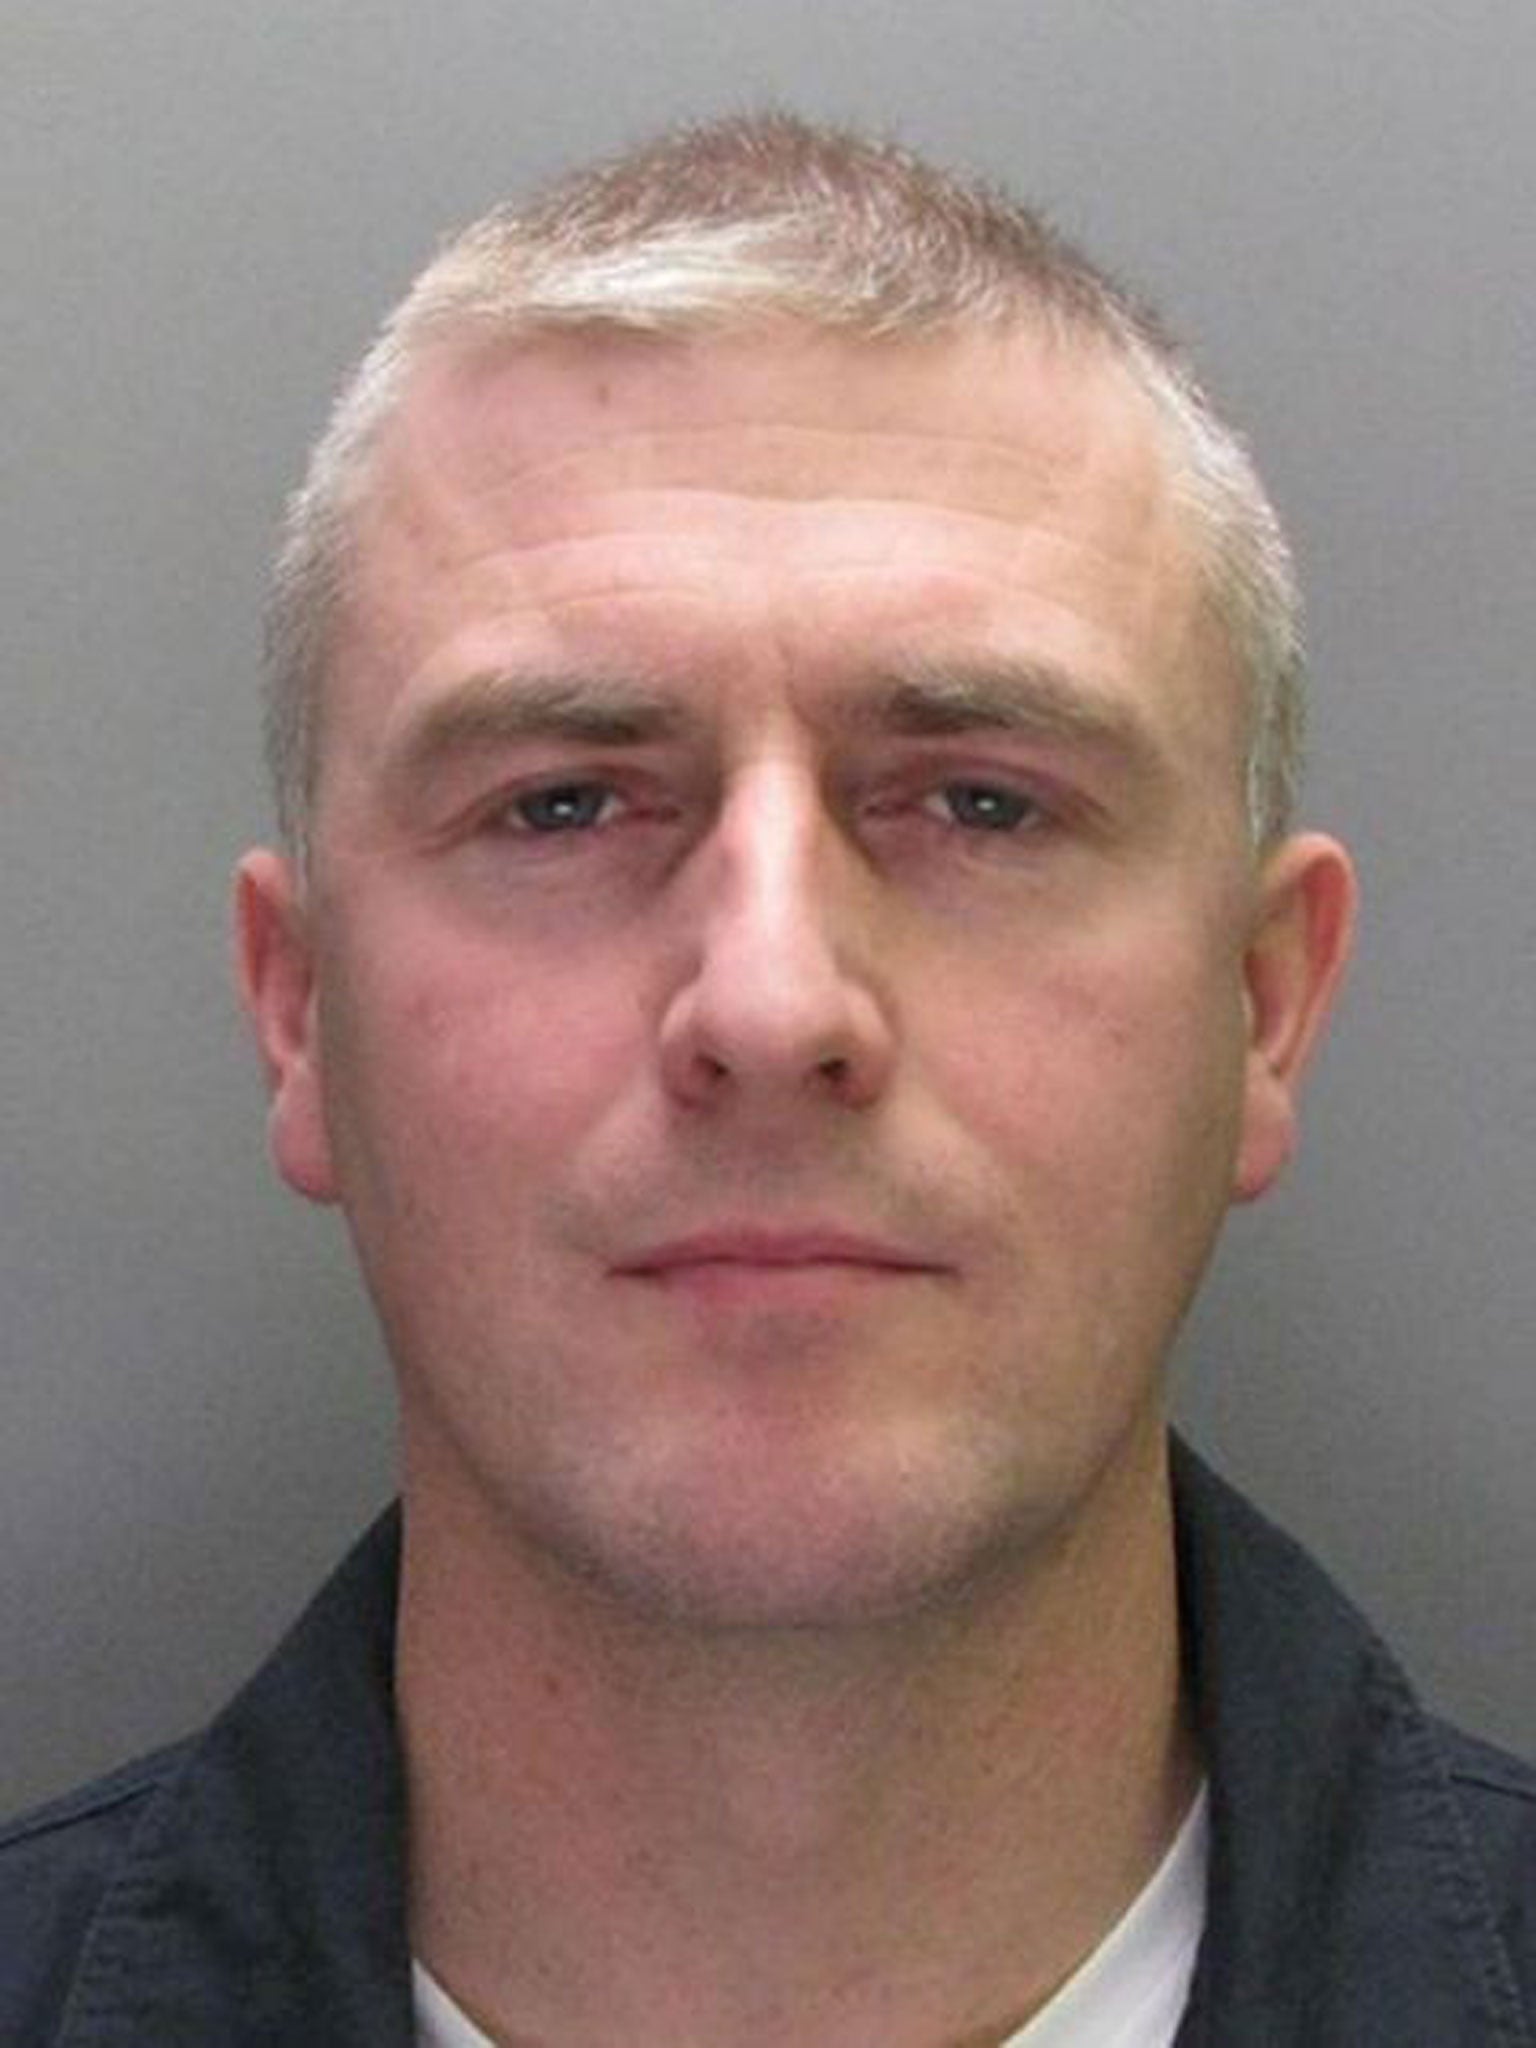 National Crime Agency handout photo of Brian Thexton, one of Britain's most wanted fugitives who was arrested last night